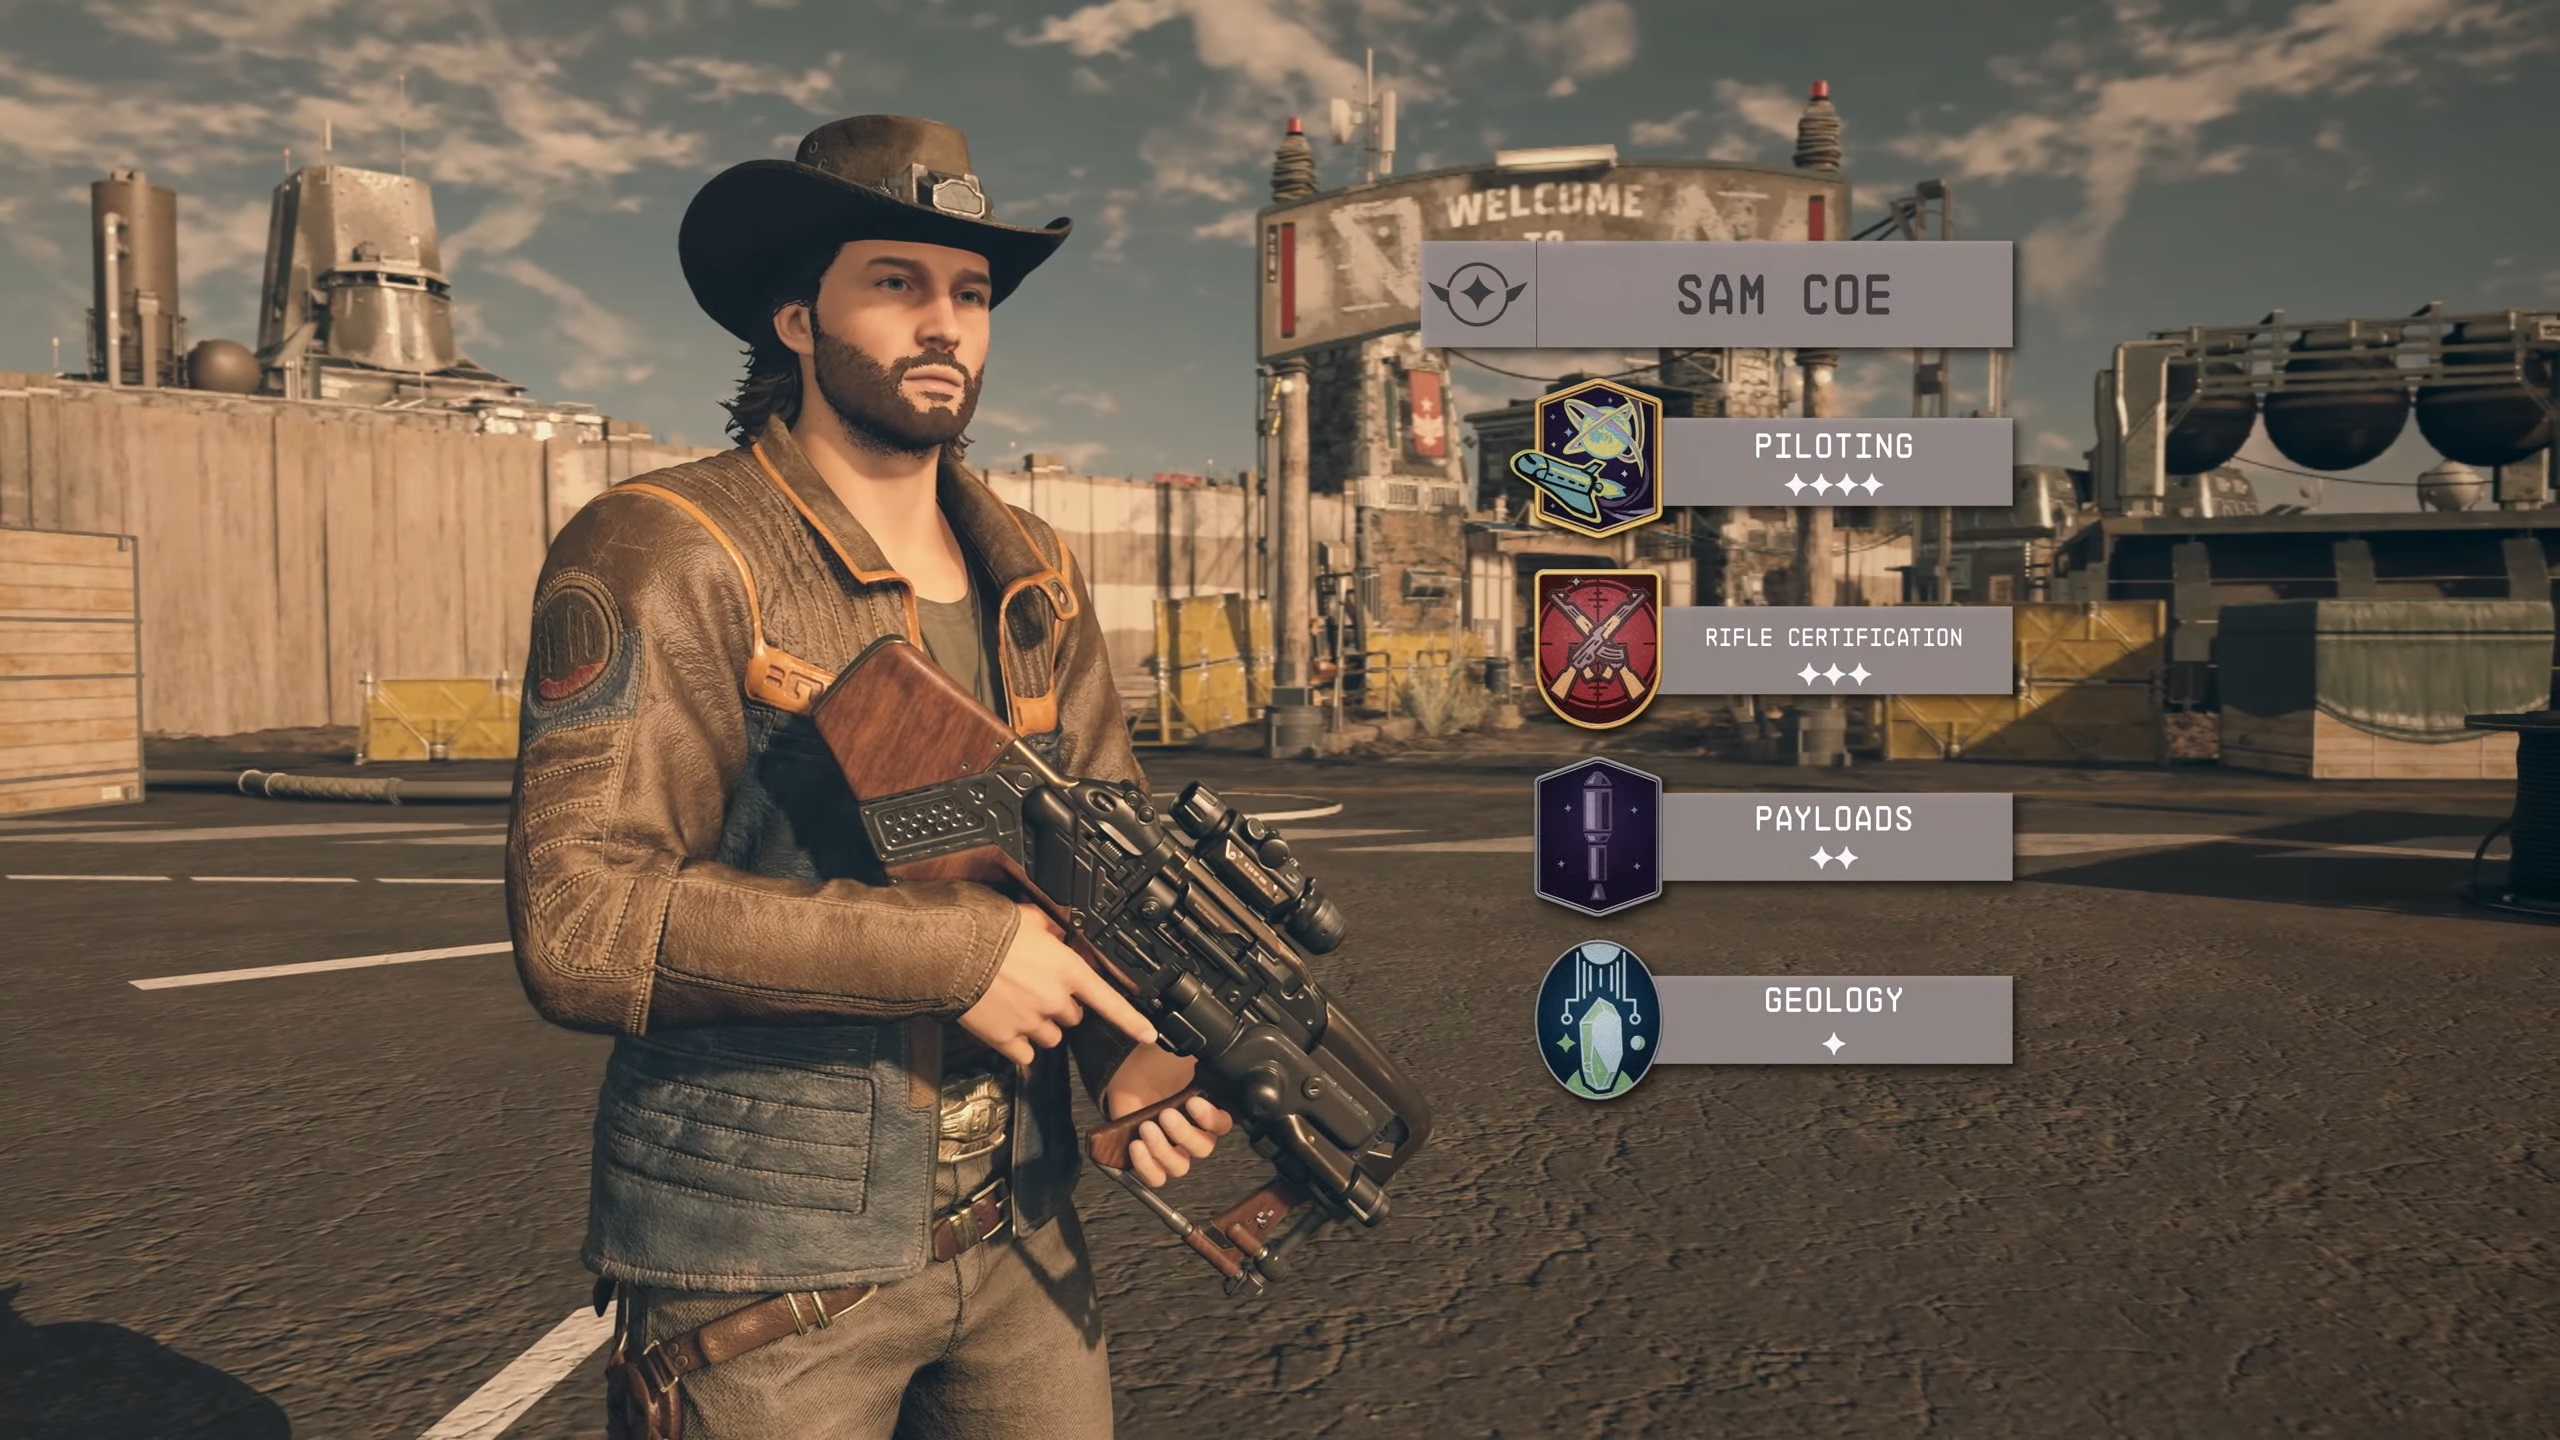 Starfield companions - Sam Coe, a man with facial hair and a cowbody hat holds a gun standing beside an overlay showing his skills